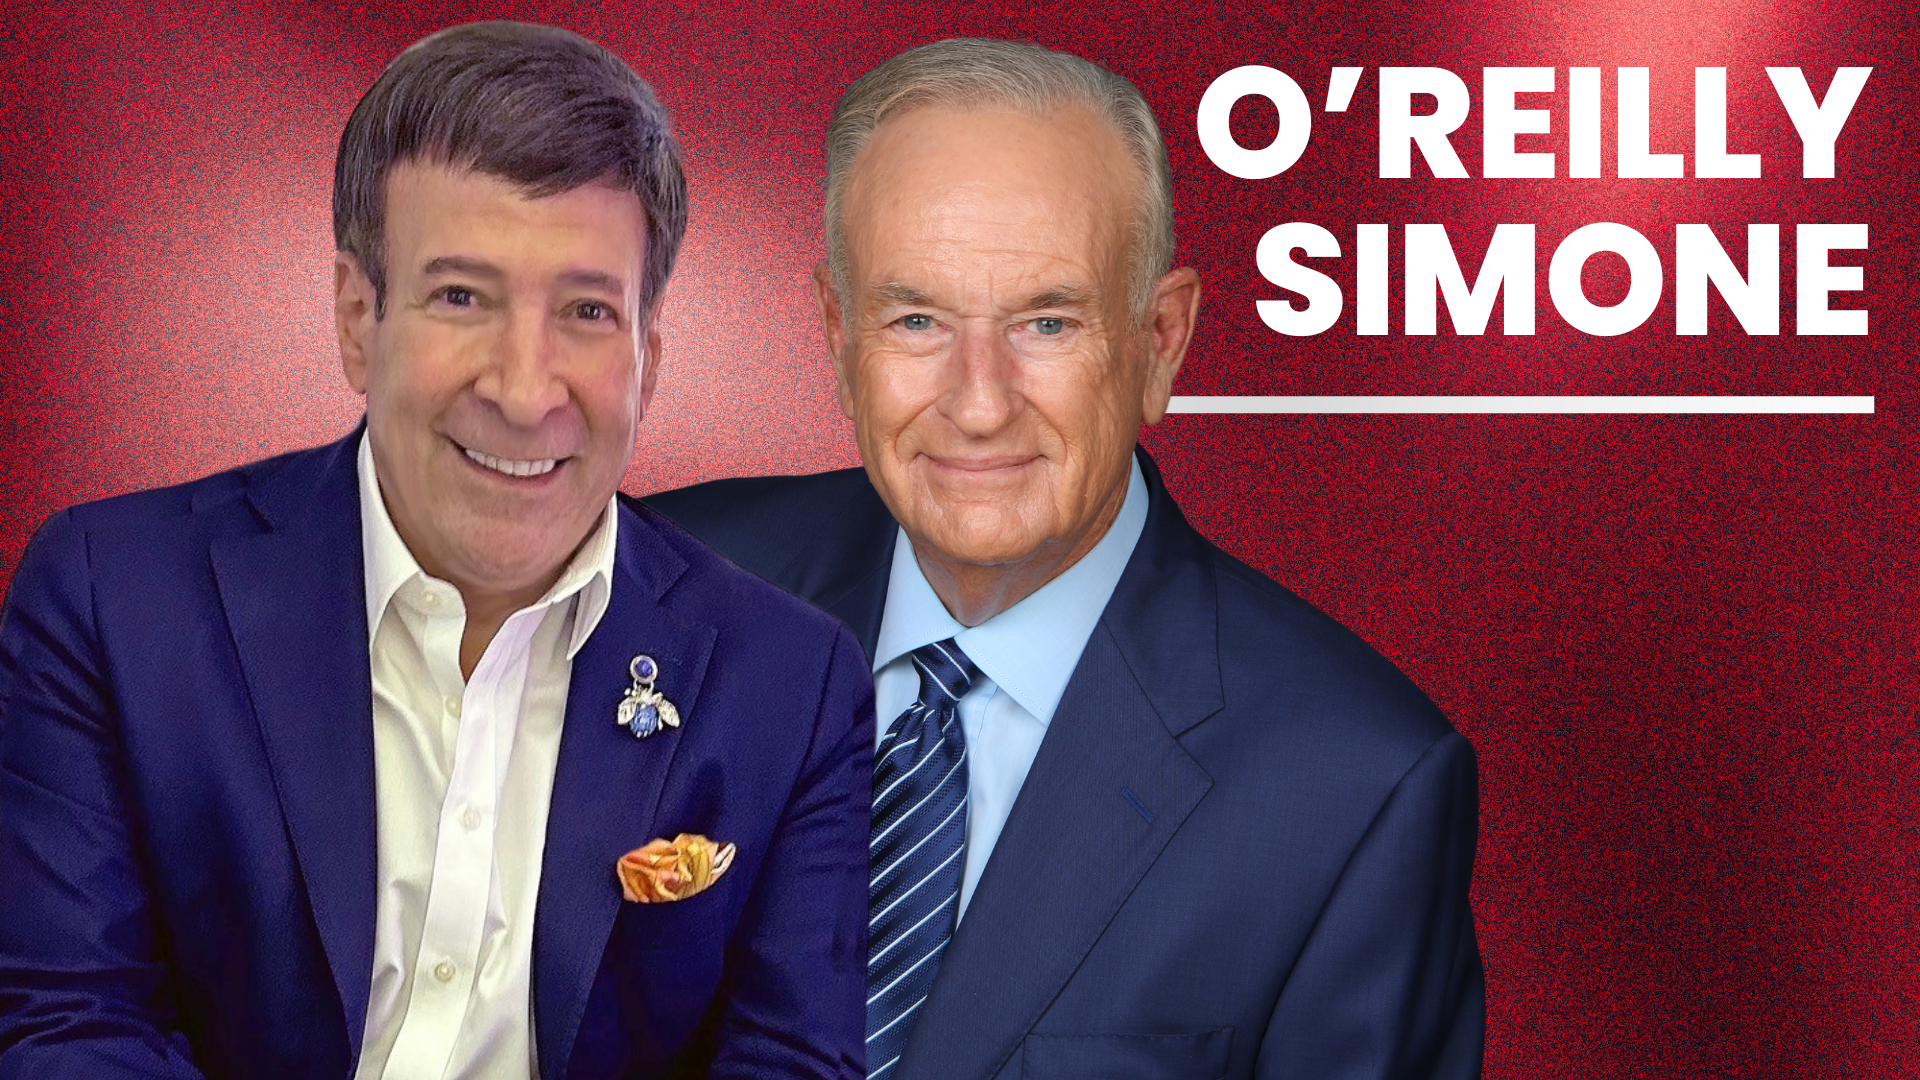 O'Reilly and Simone on College Intolerance